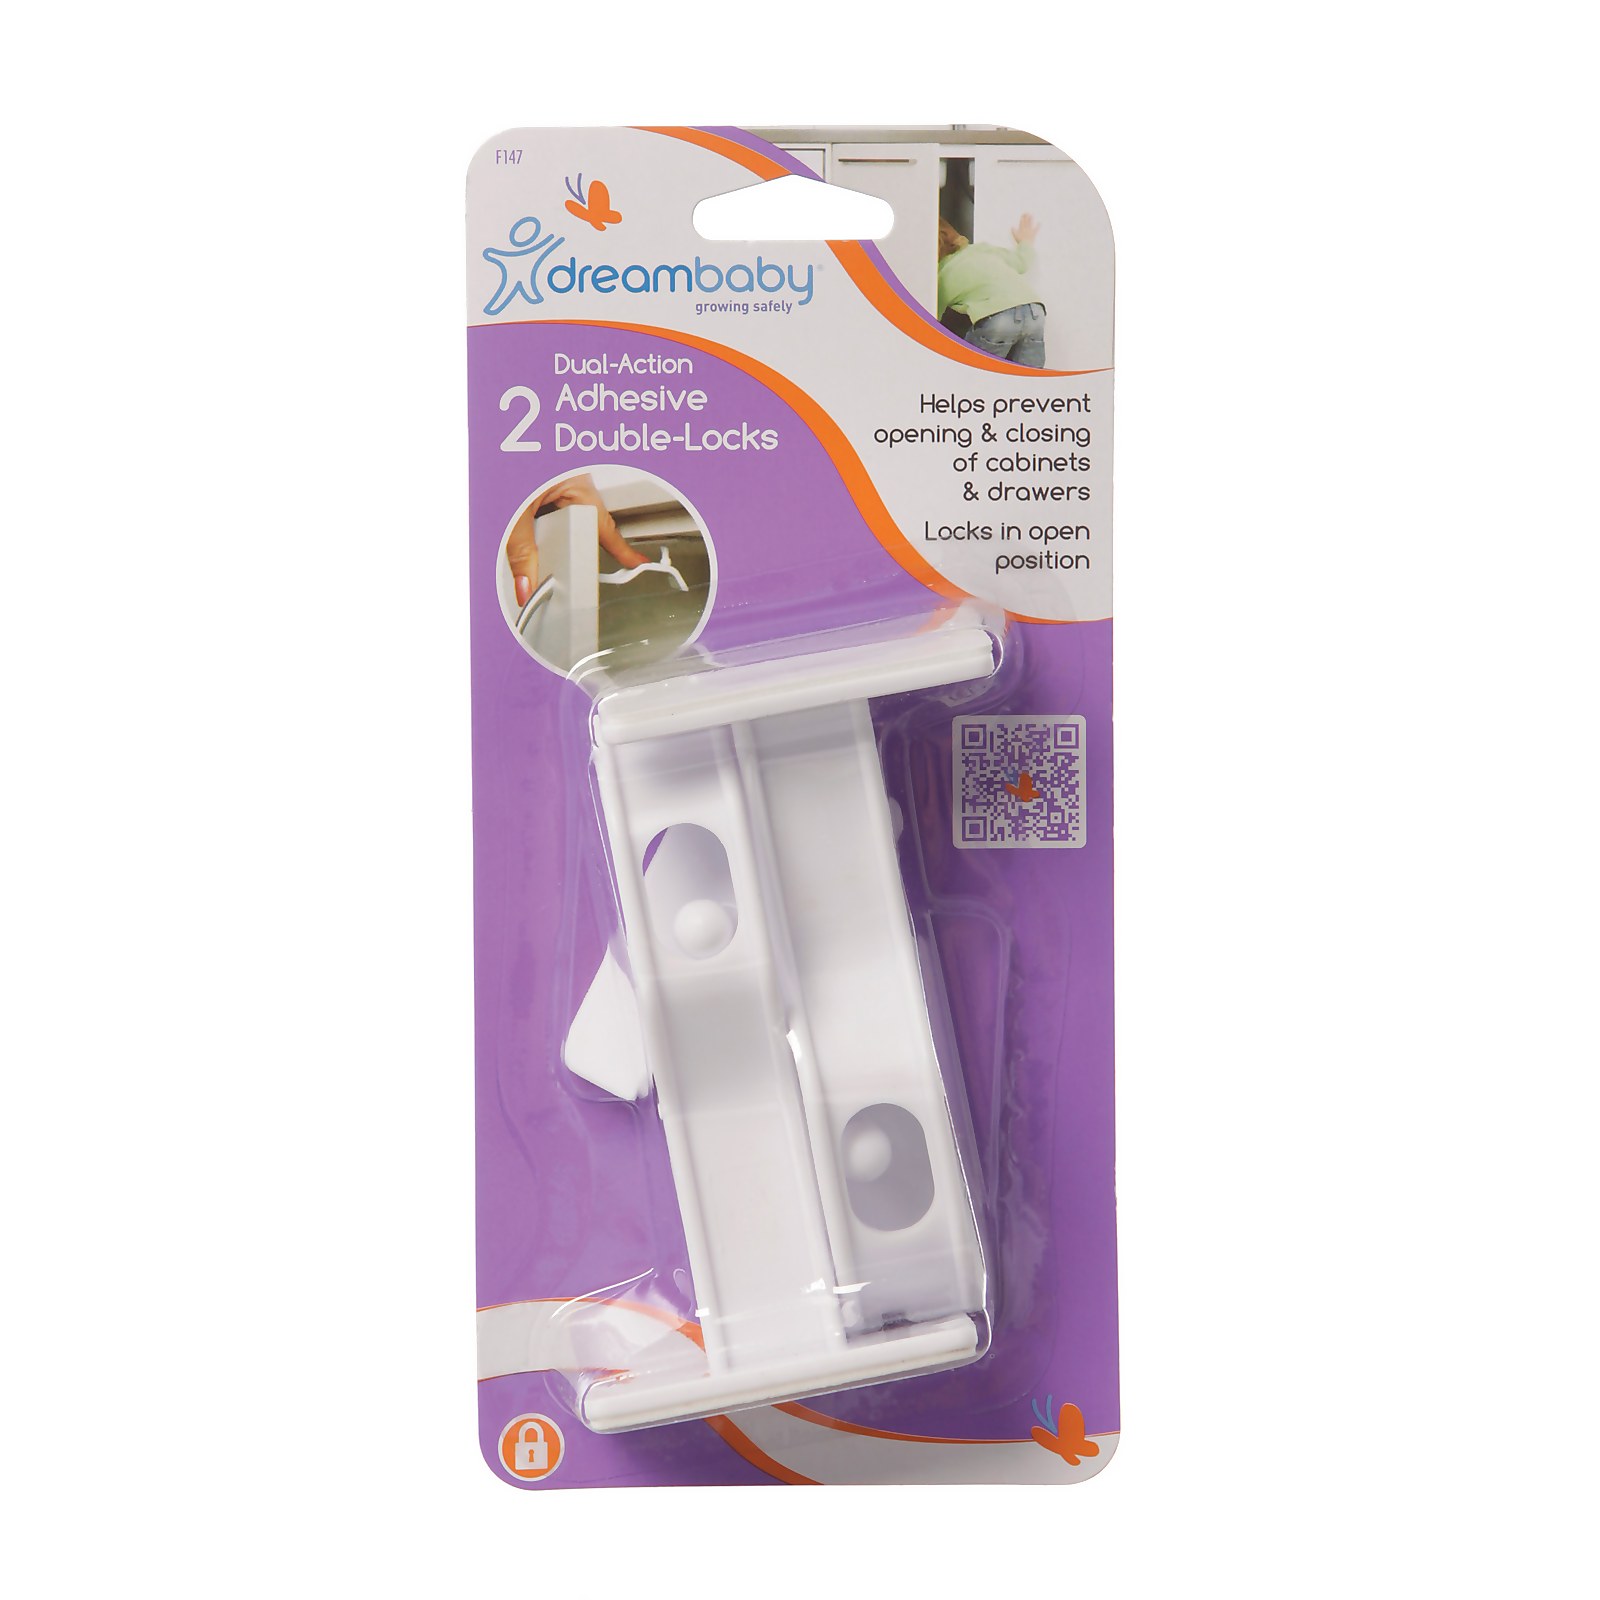 Photo of Dreambaby Dual-action Adhesive Double-locks - 2 Pack